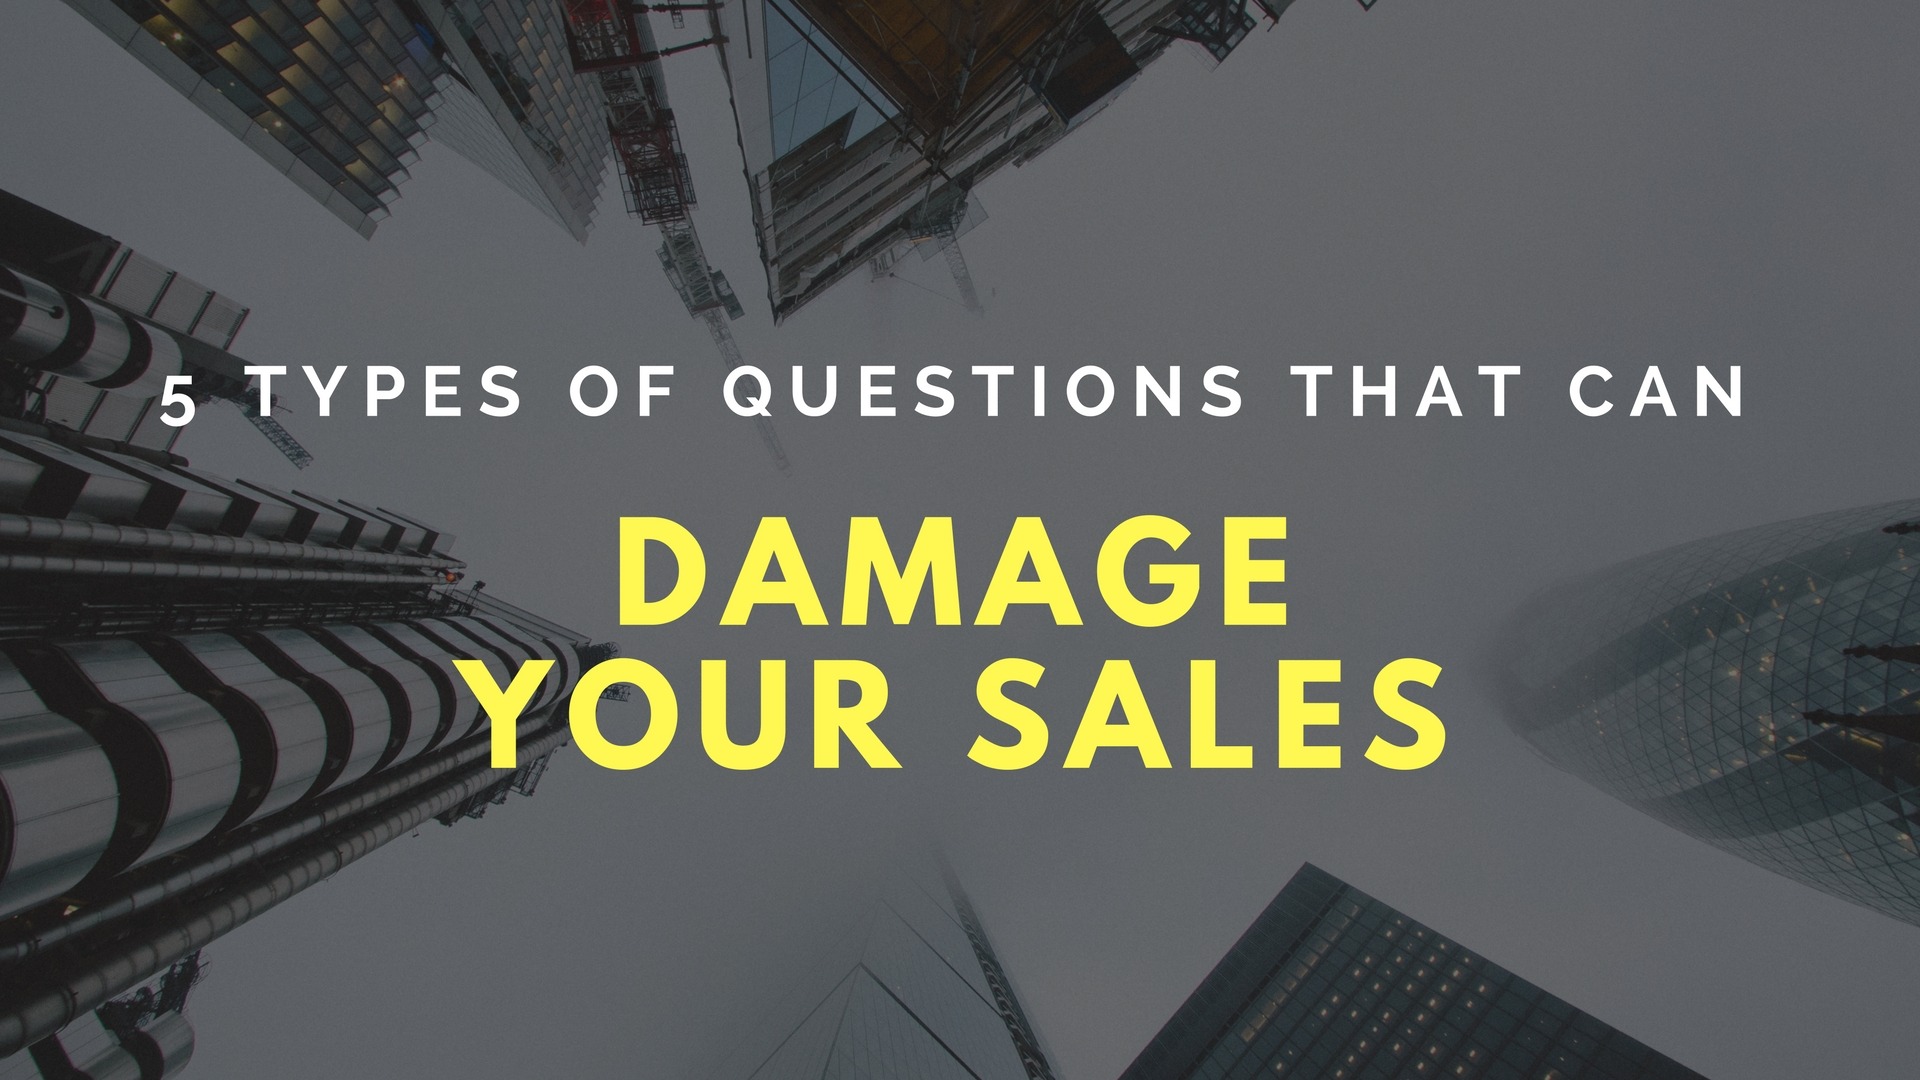 5 types of questions that can damage your sales